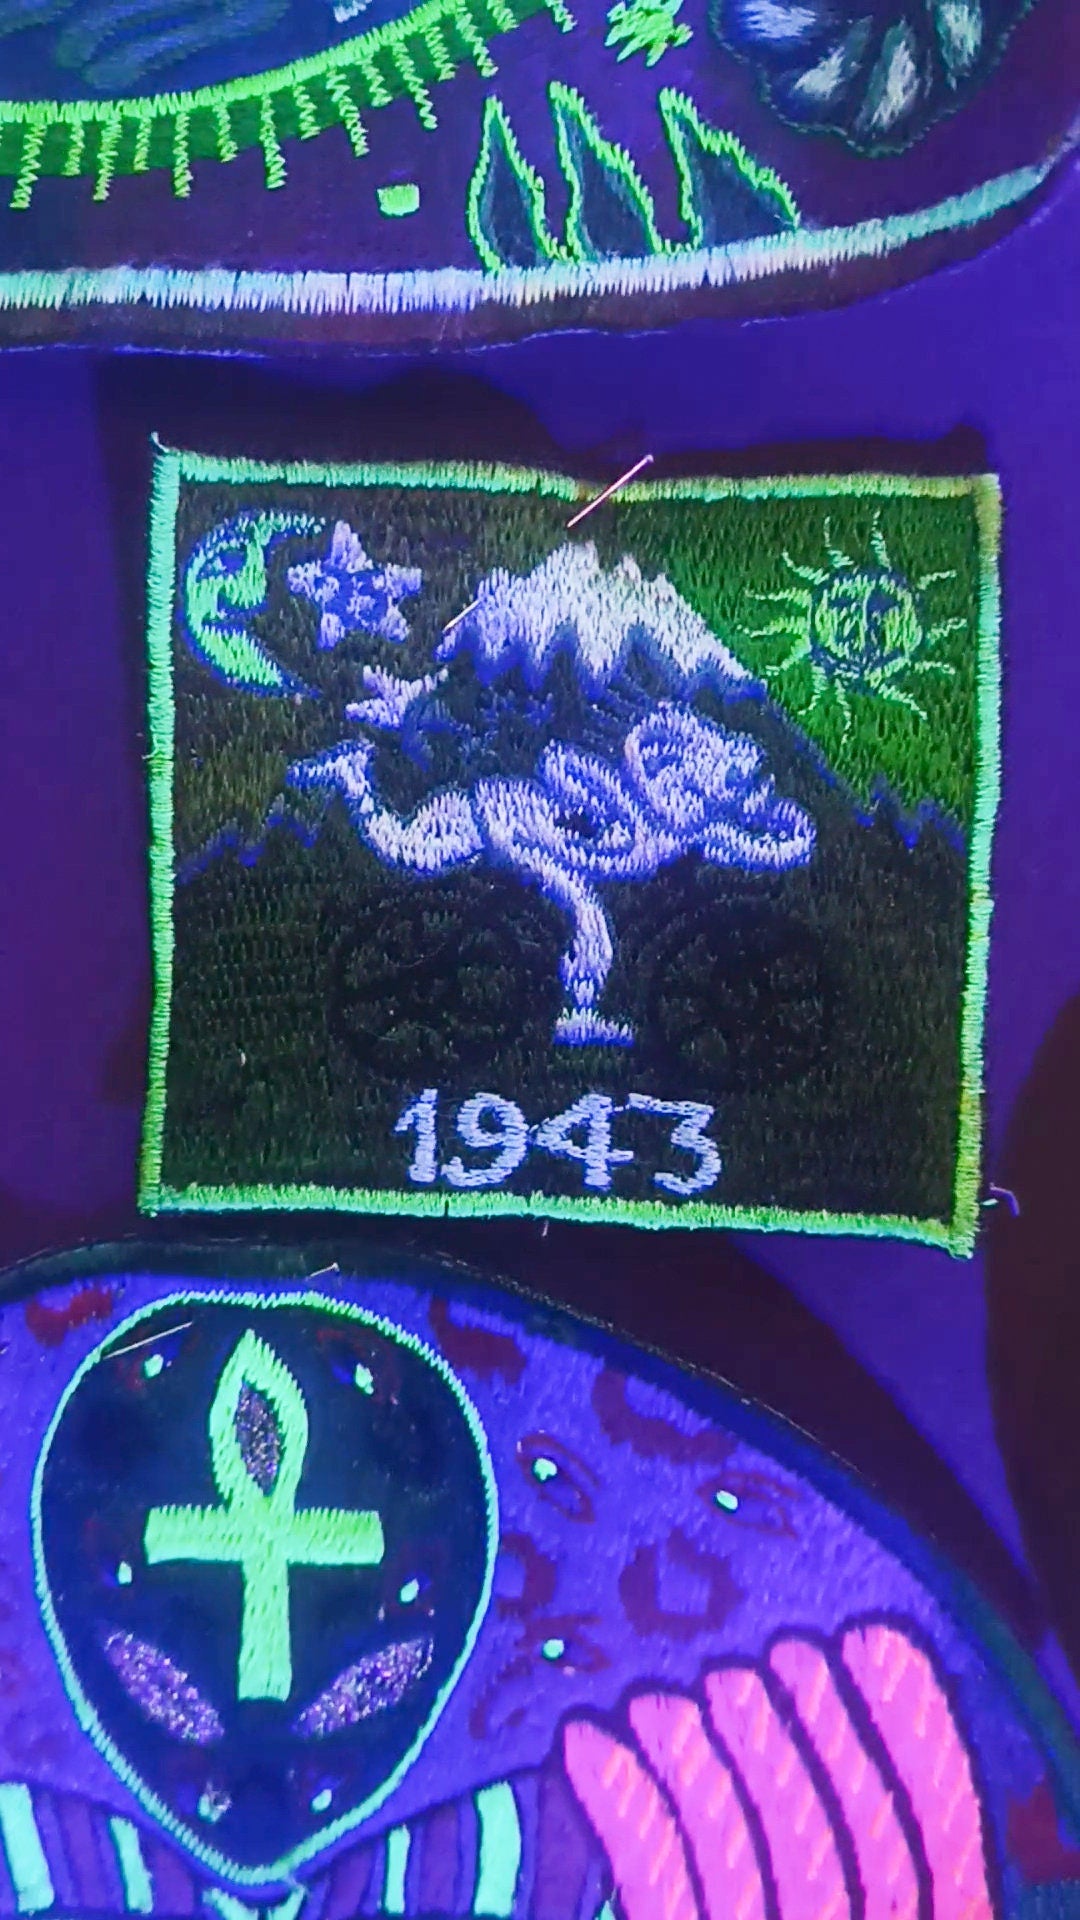 Small Green Bicycle Day LSD Patch Albert Hofmann 1943 Burning Man Psychedelic Acid Trip Hippie Visionary Drug Cosmic Healing Medicine